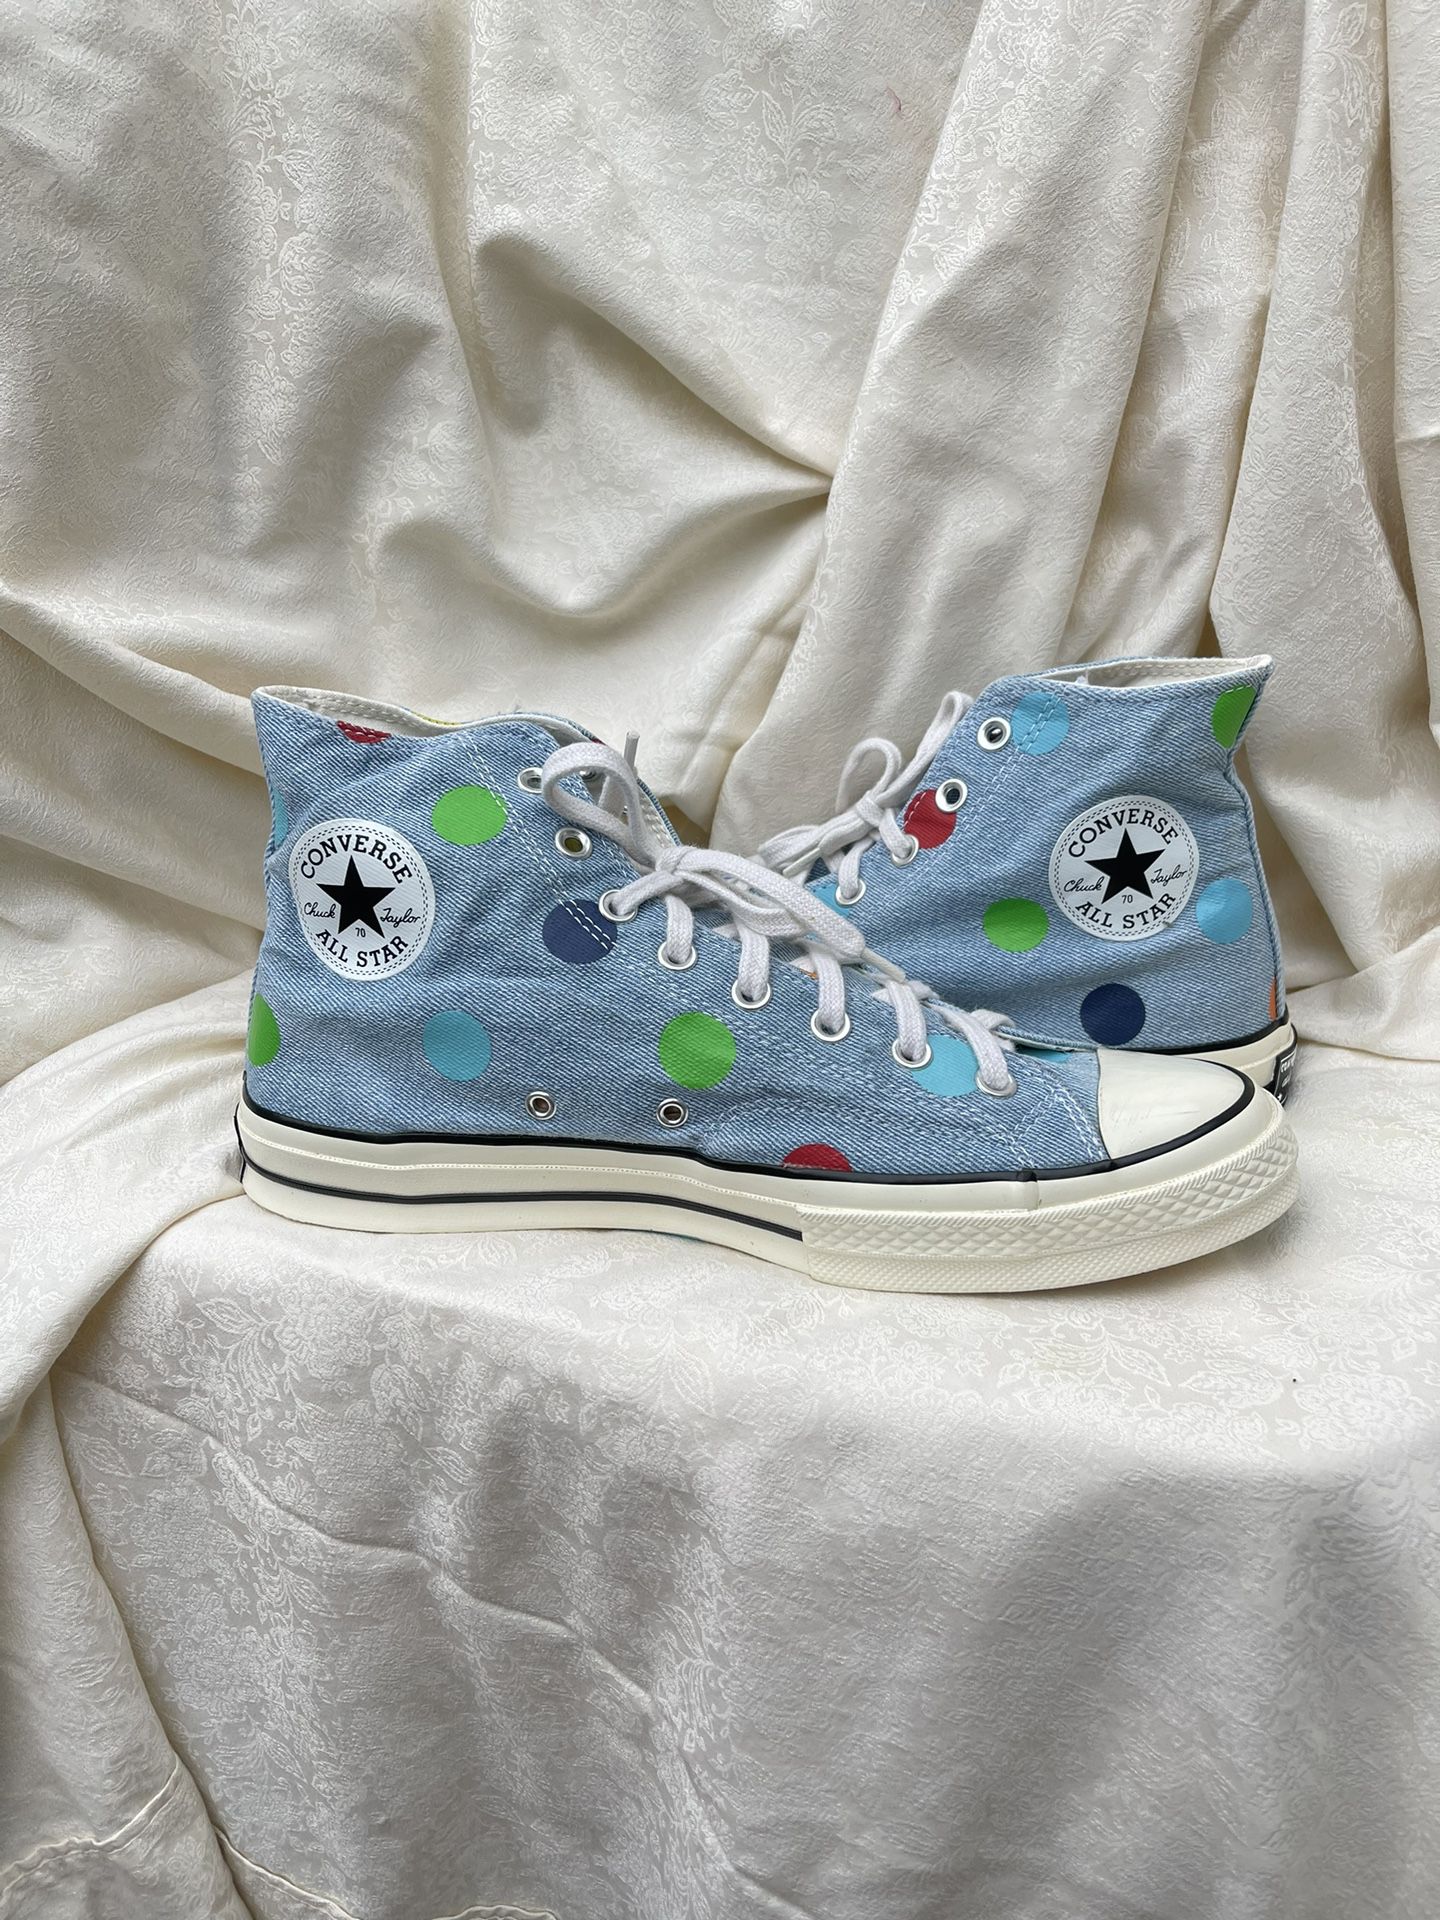 Converse Chuck Taylor All Star 70 x Golf Wang 'Blue Polka Dot' 170011C for  Sale in Los Angeles, CA - OfferUp